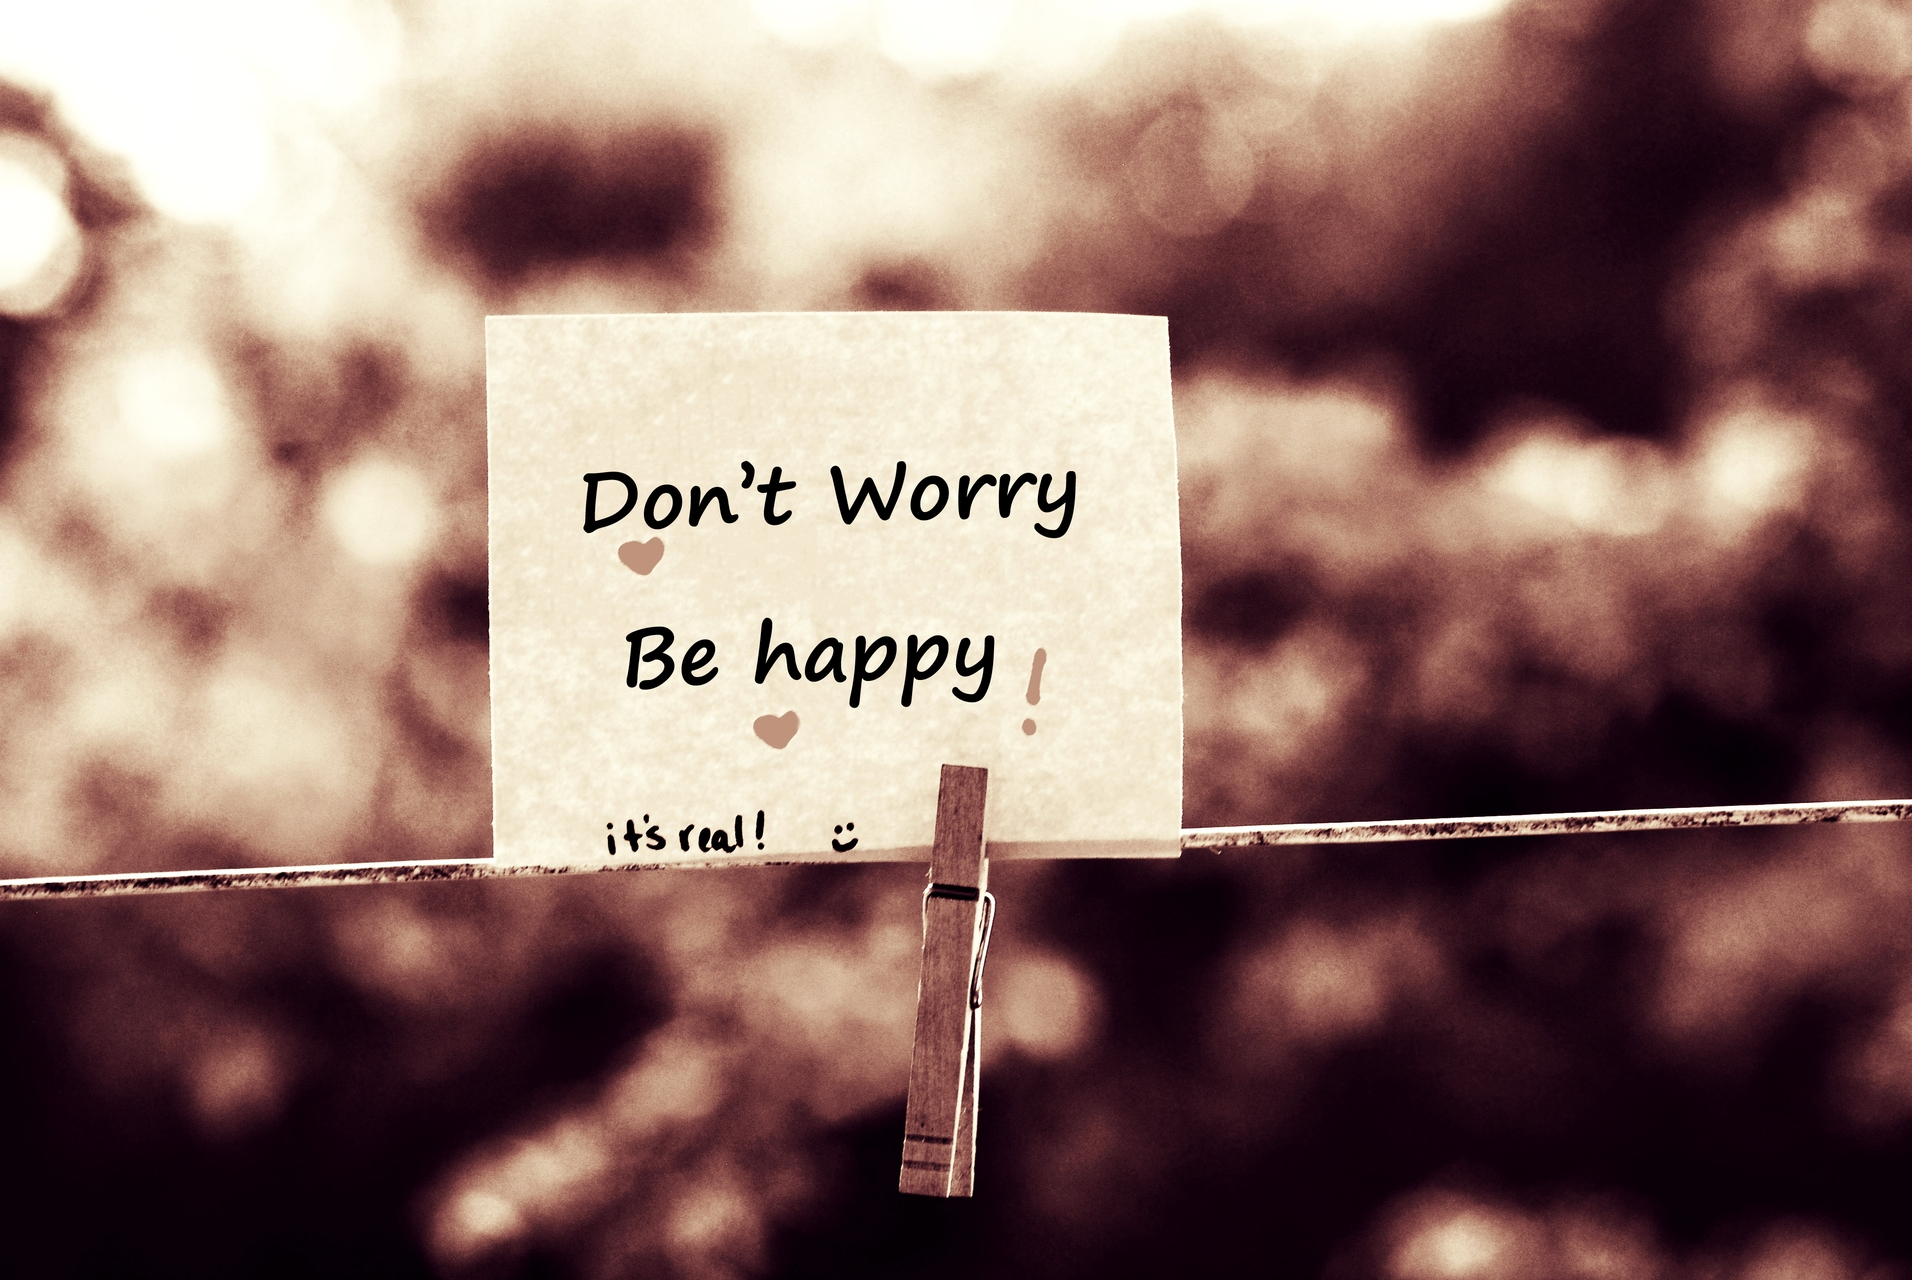 Enough be happy. Don't worry be Happy. Don t worry be Happy картинки. Донт вори би Хэппи. Don't worry be Happy обои.